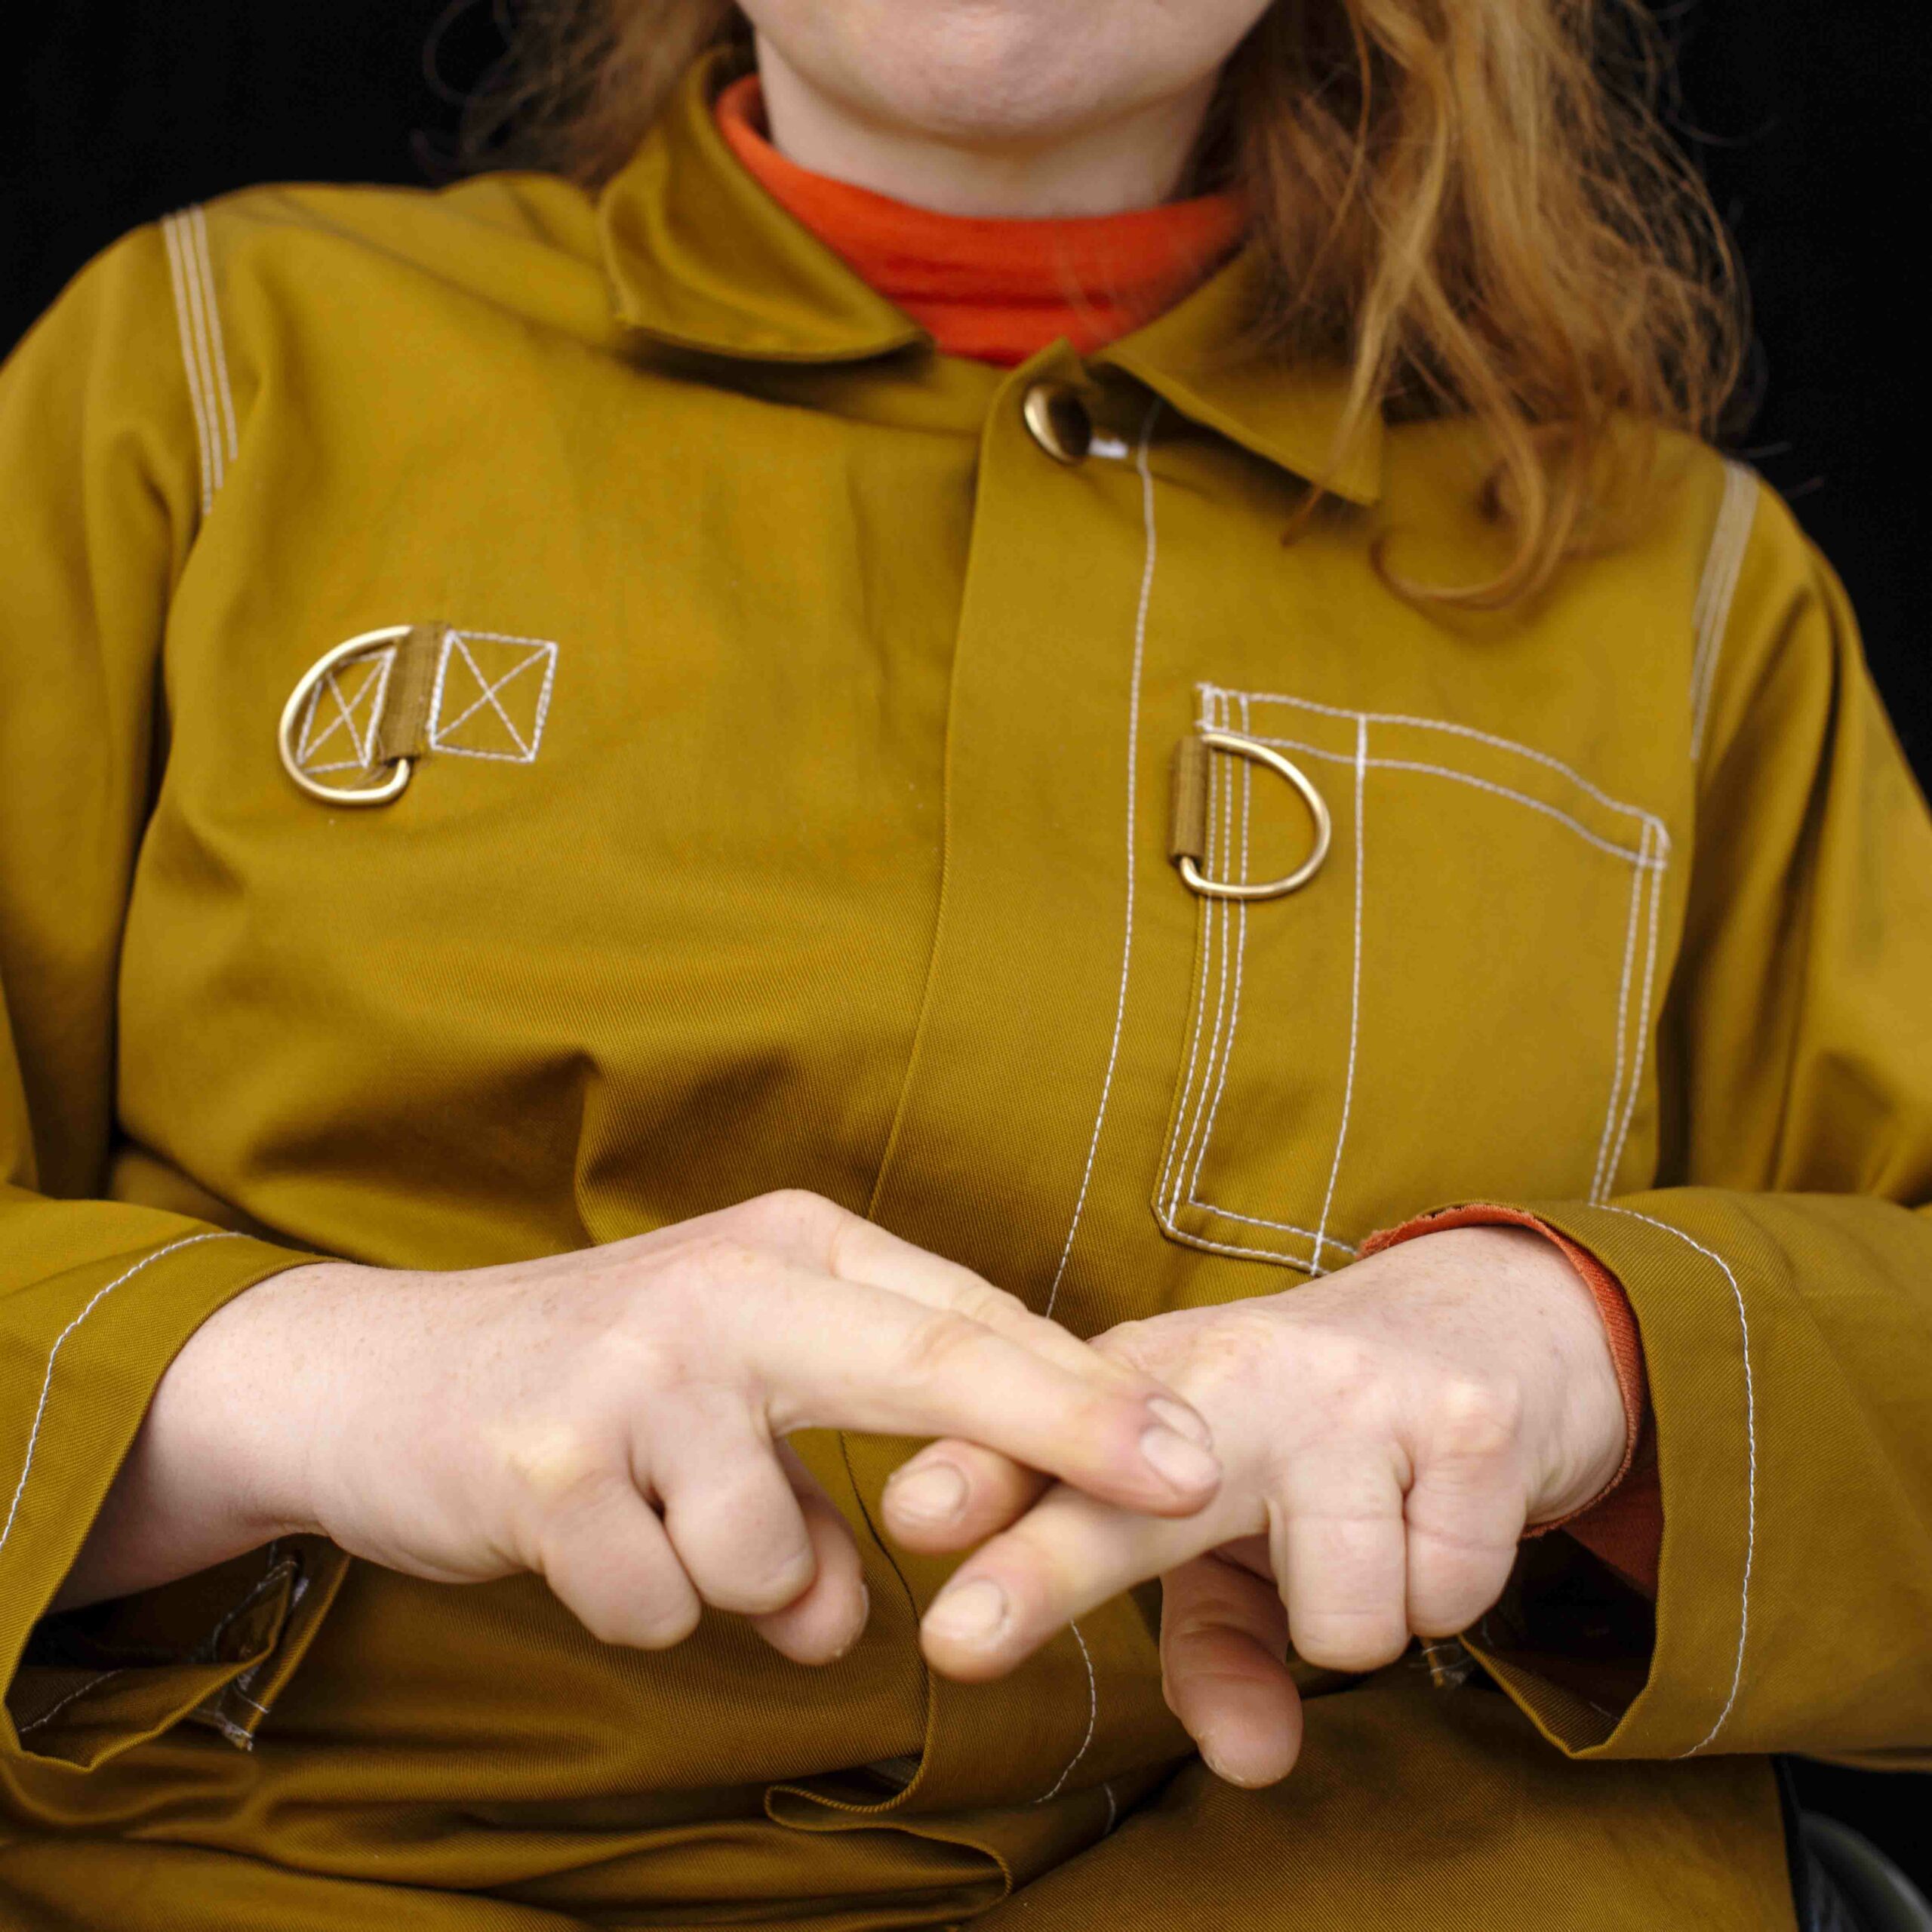 The image depicts a person wearing a mustard-yellow dress over a bright red sweater. They sign with their hands. Photo: Lars Dyrendom